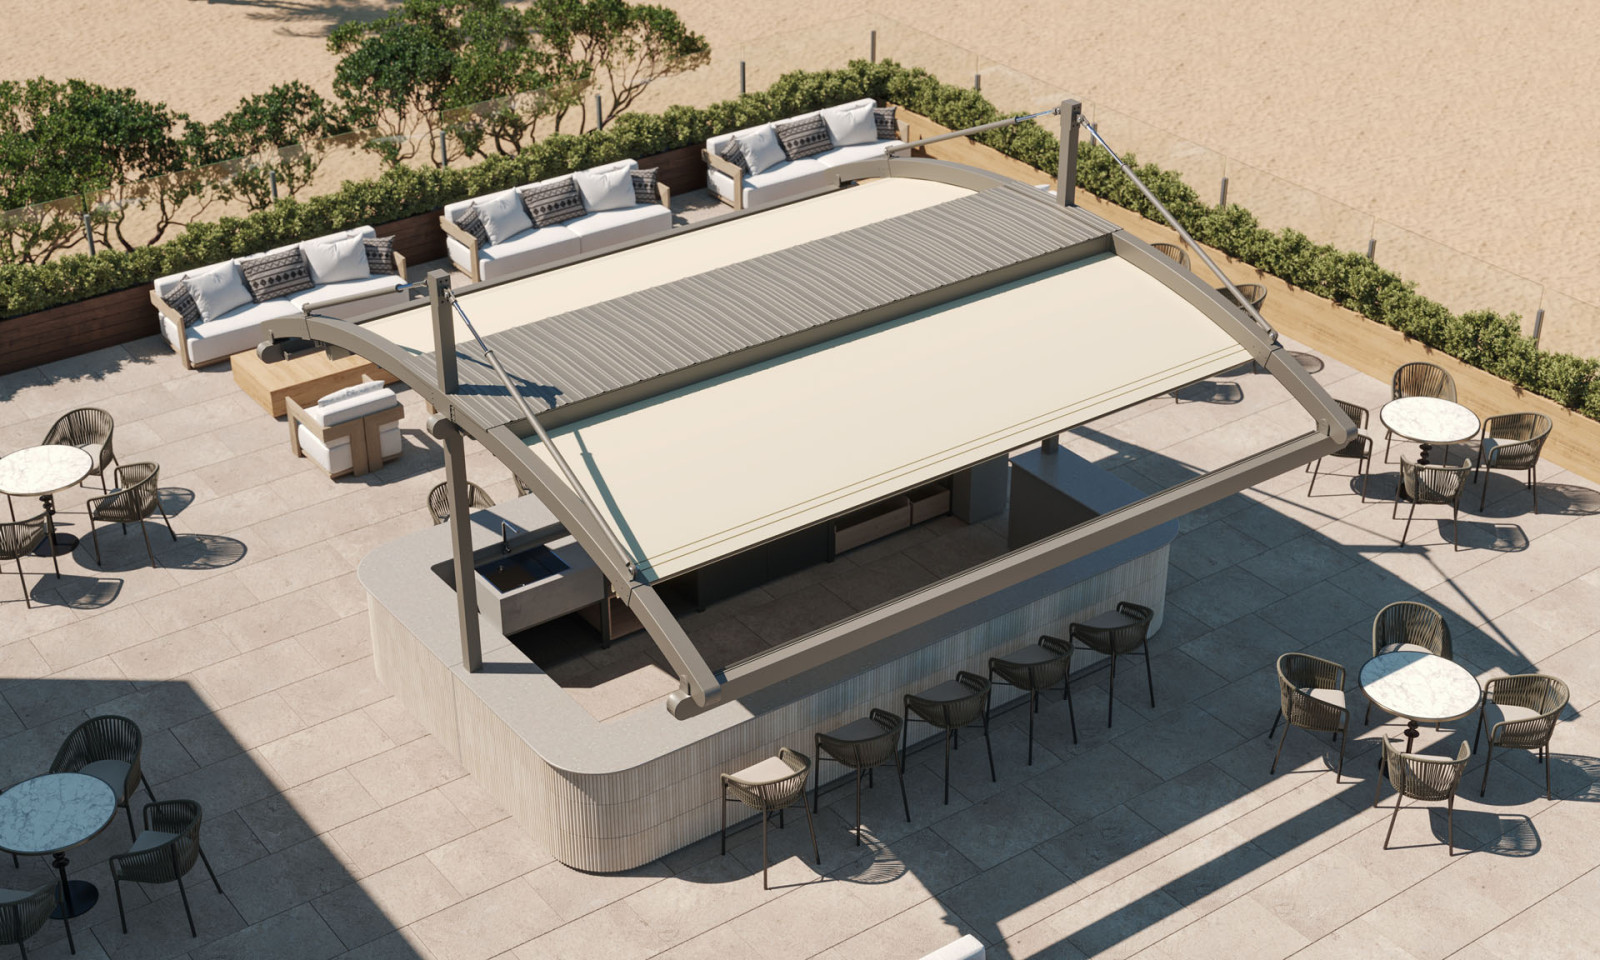 A bar outdoors covered by Fabric Pergola with rounded roof, providing a shaded spot for enjoying beverages.